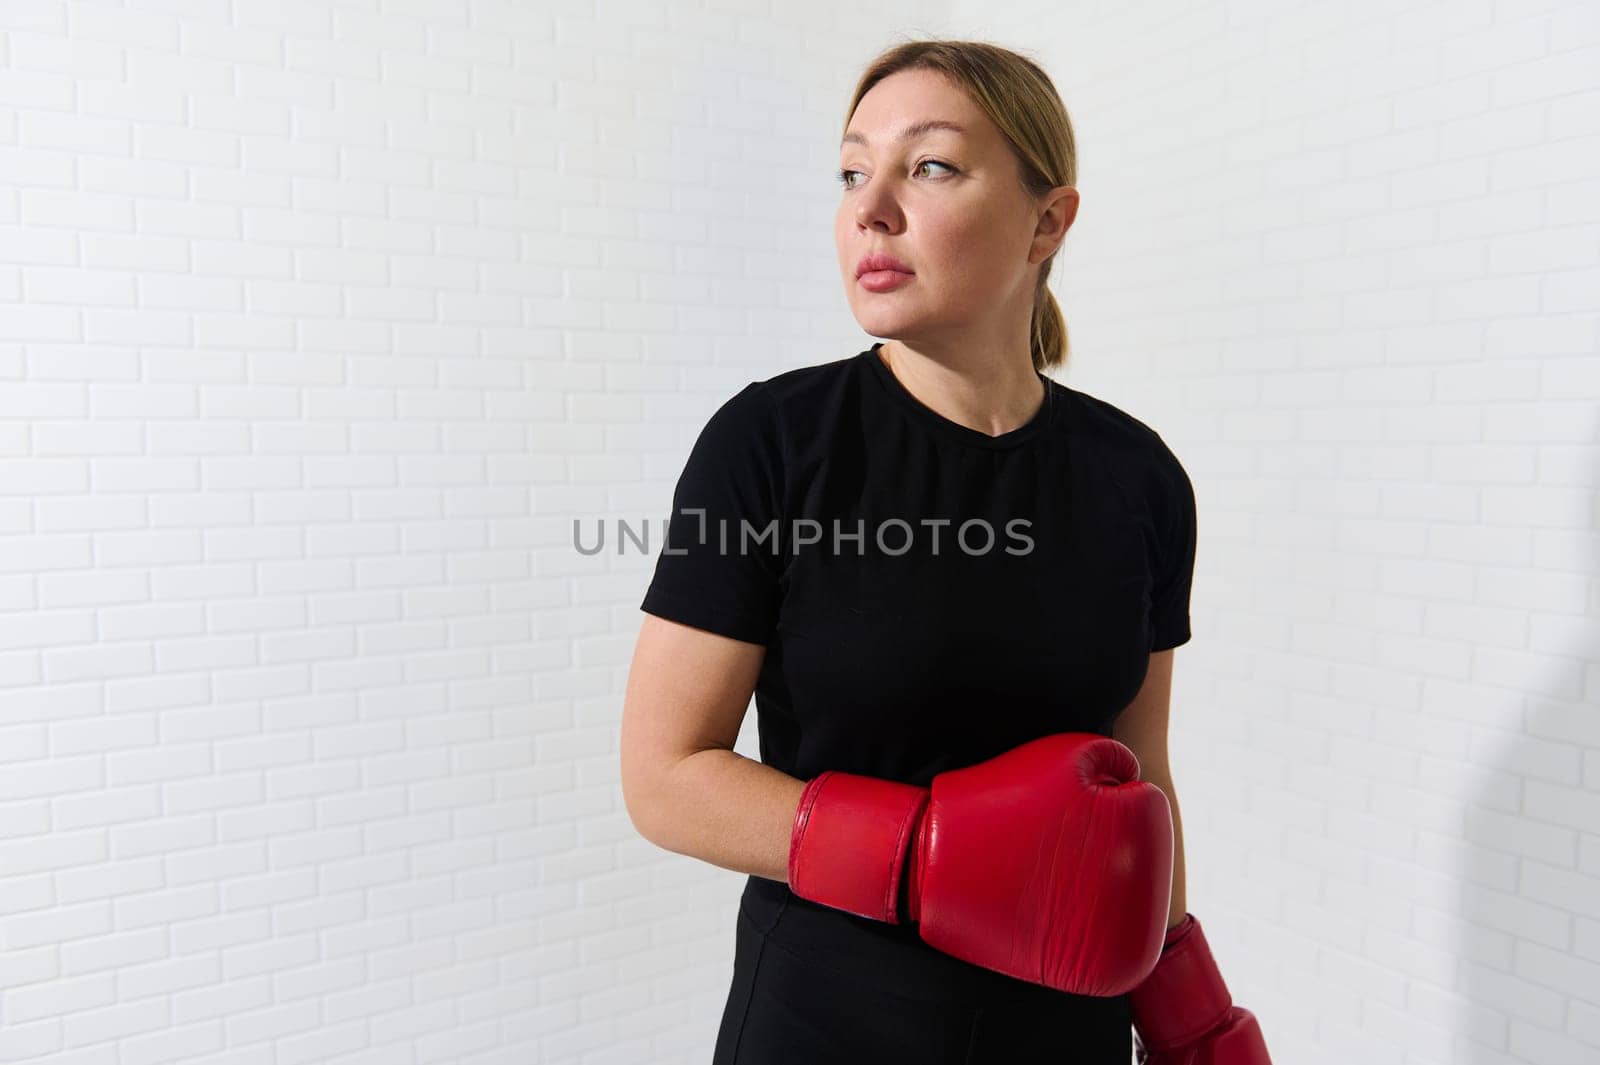 Beautiful confident European woman in sportswear and red boxing gloves, looking aside, practicing box and kickbox, isolated over white wall background. Martial art concept. Copy advertising space